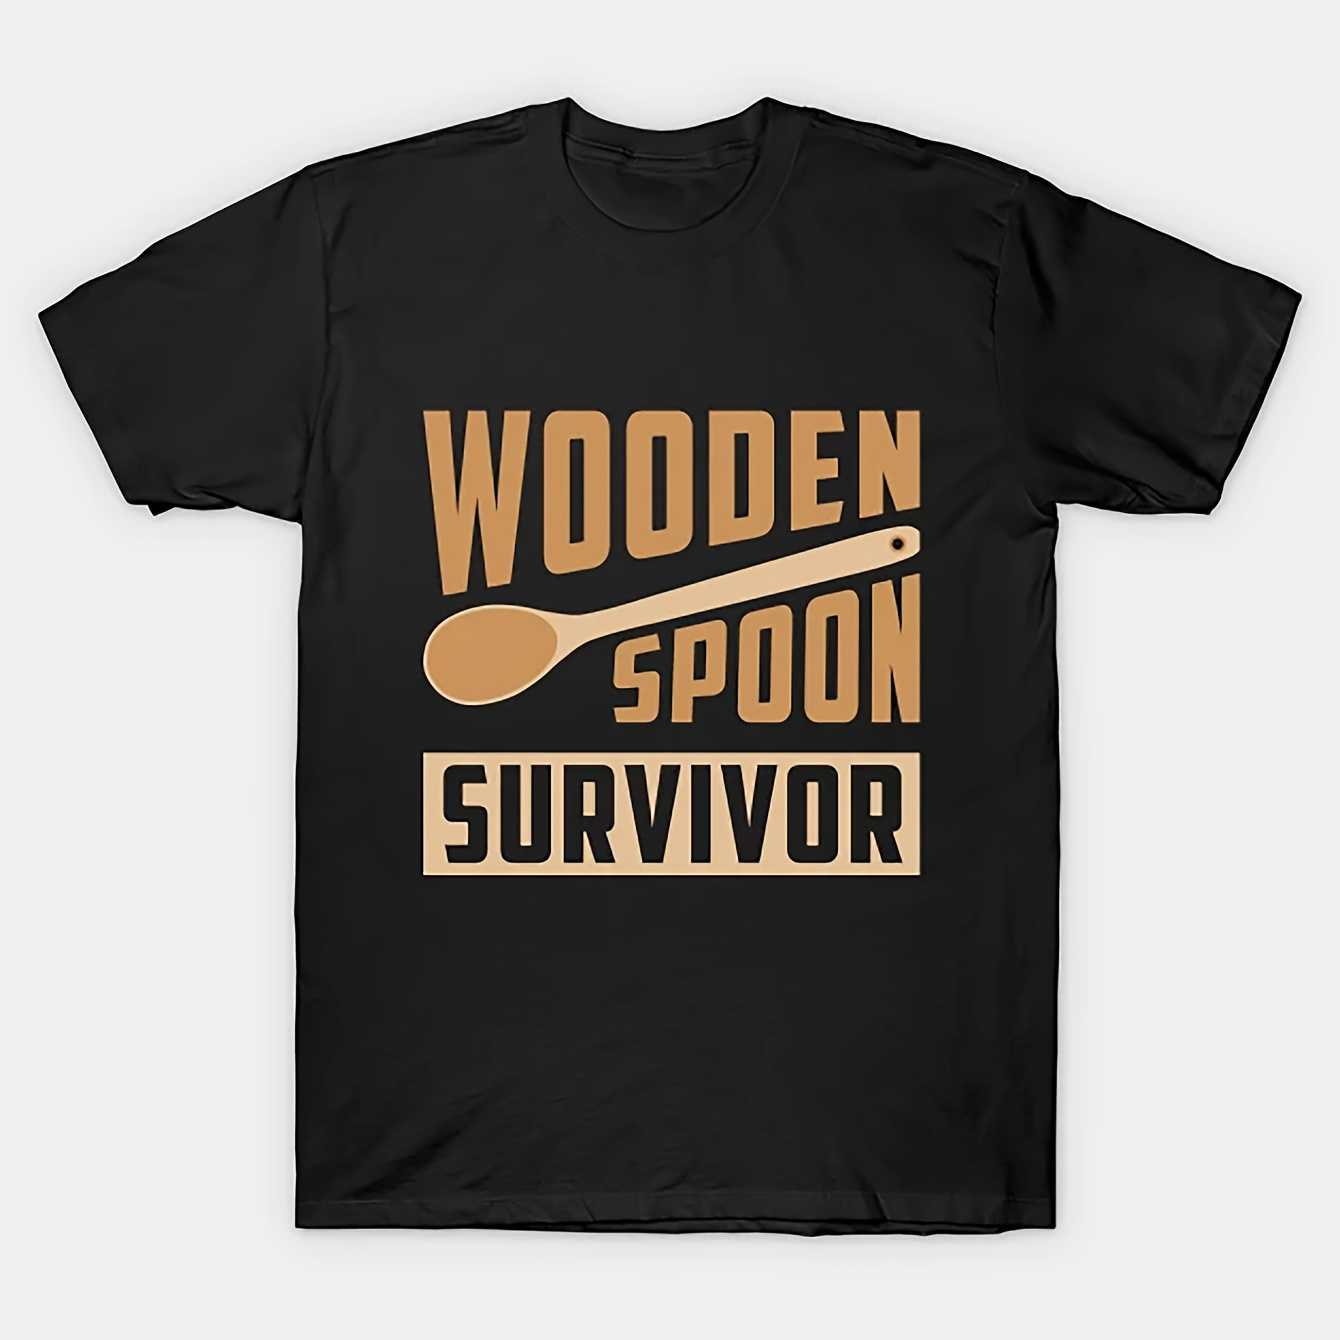 

Wooden Spoon Survivor T-shirt, Men's Crew Neck Short Sleeve Tee Fashion Regular Fit T-shirt, Casual Comfy Breathable Top For Spring Summer Holiday Leisure Vacation Men's Clothing As Gift